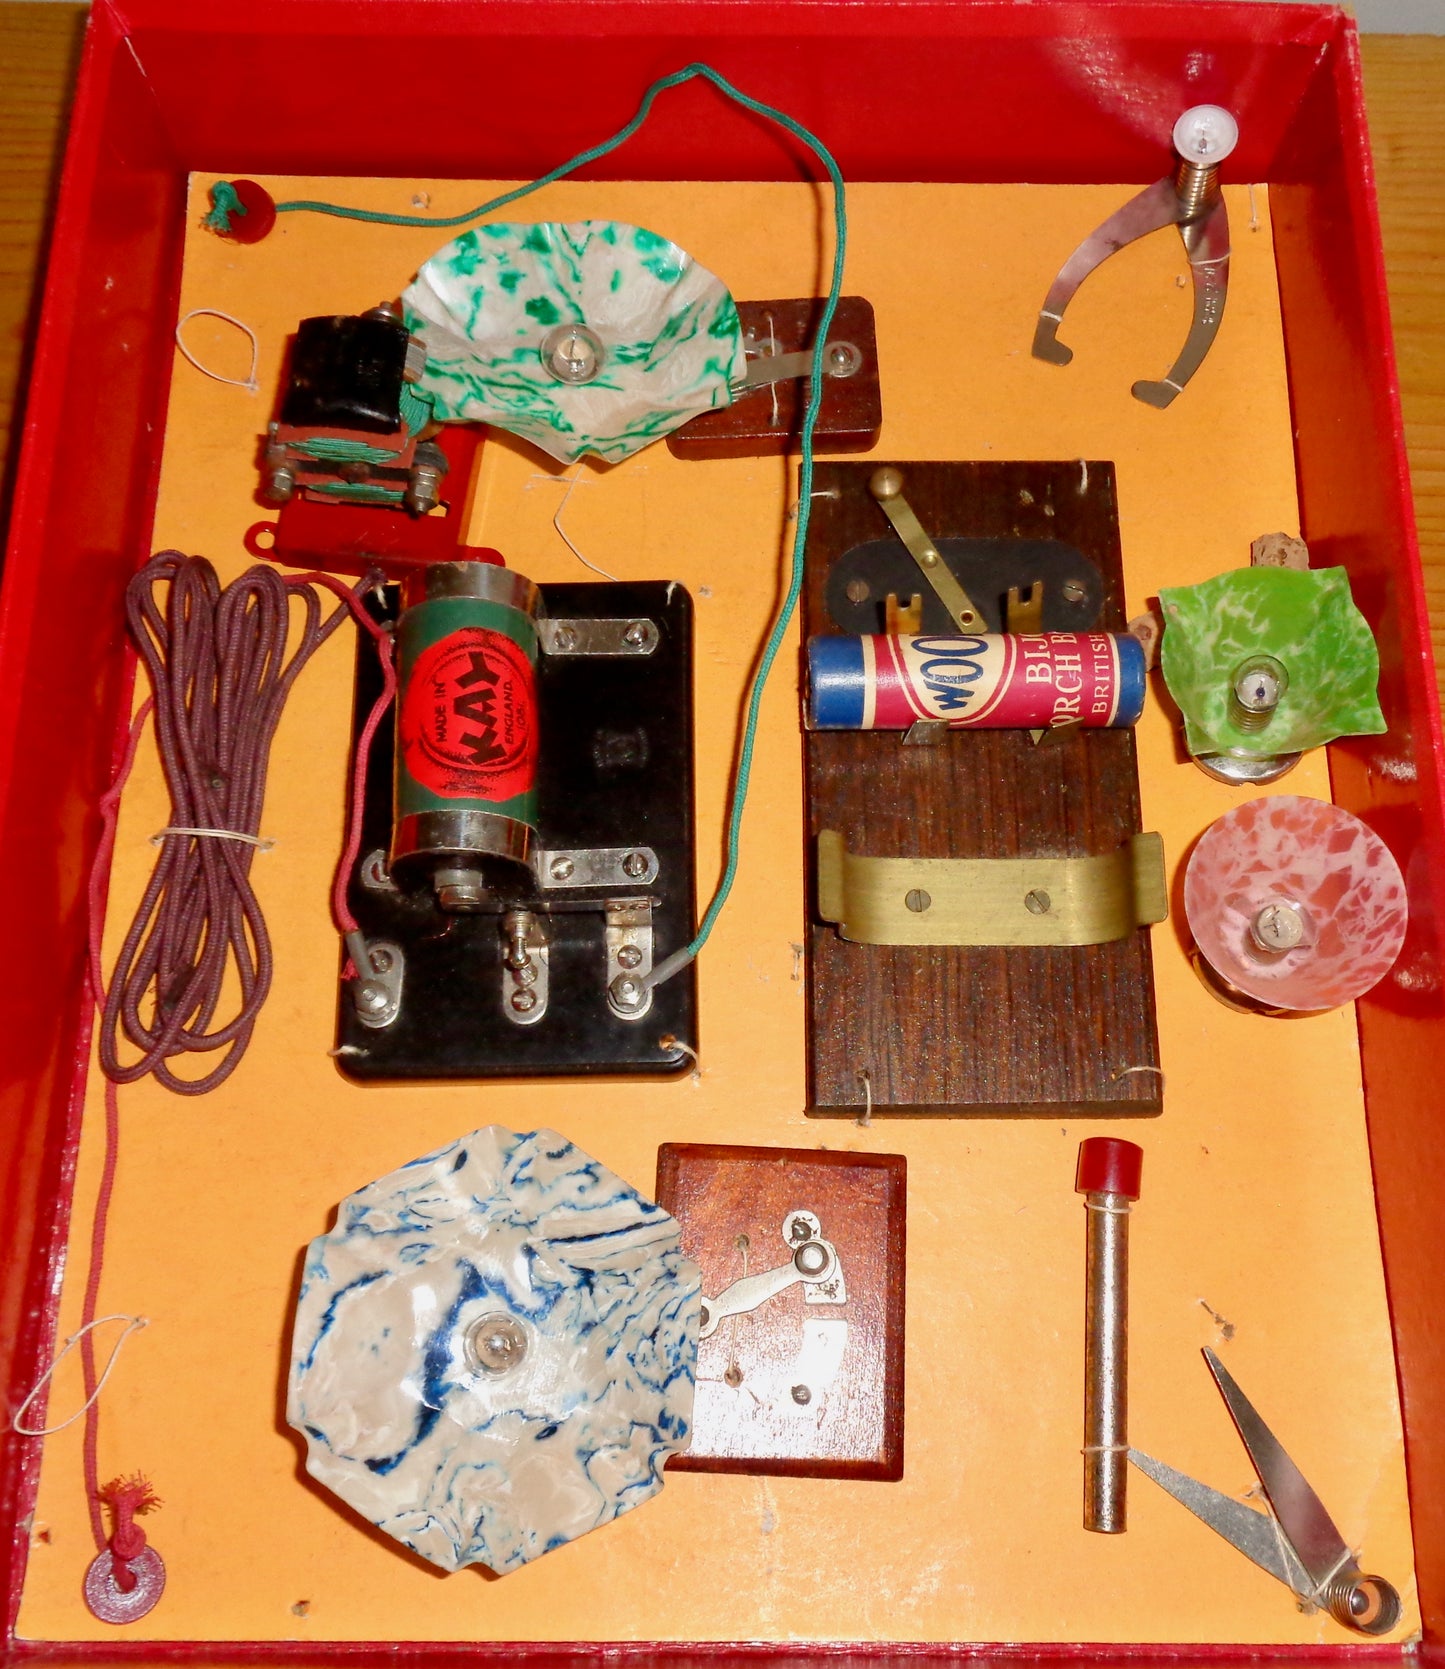 1920s The Kay Electrical Outfit Electronics Toy With Electric Motor / Induction Coil and Leads / Bulbs